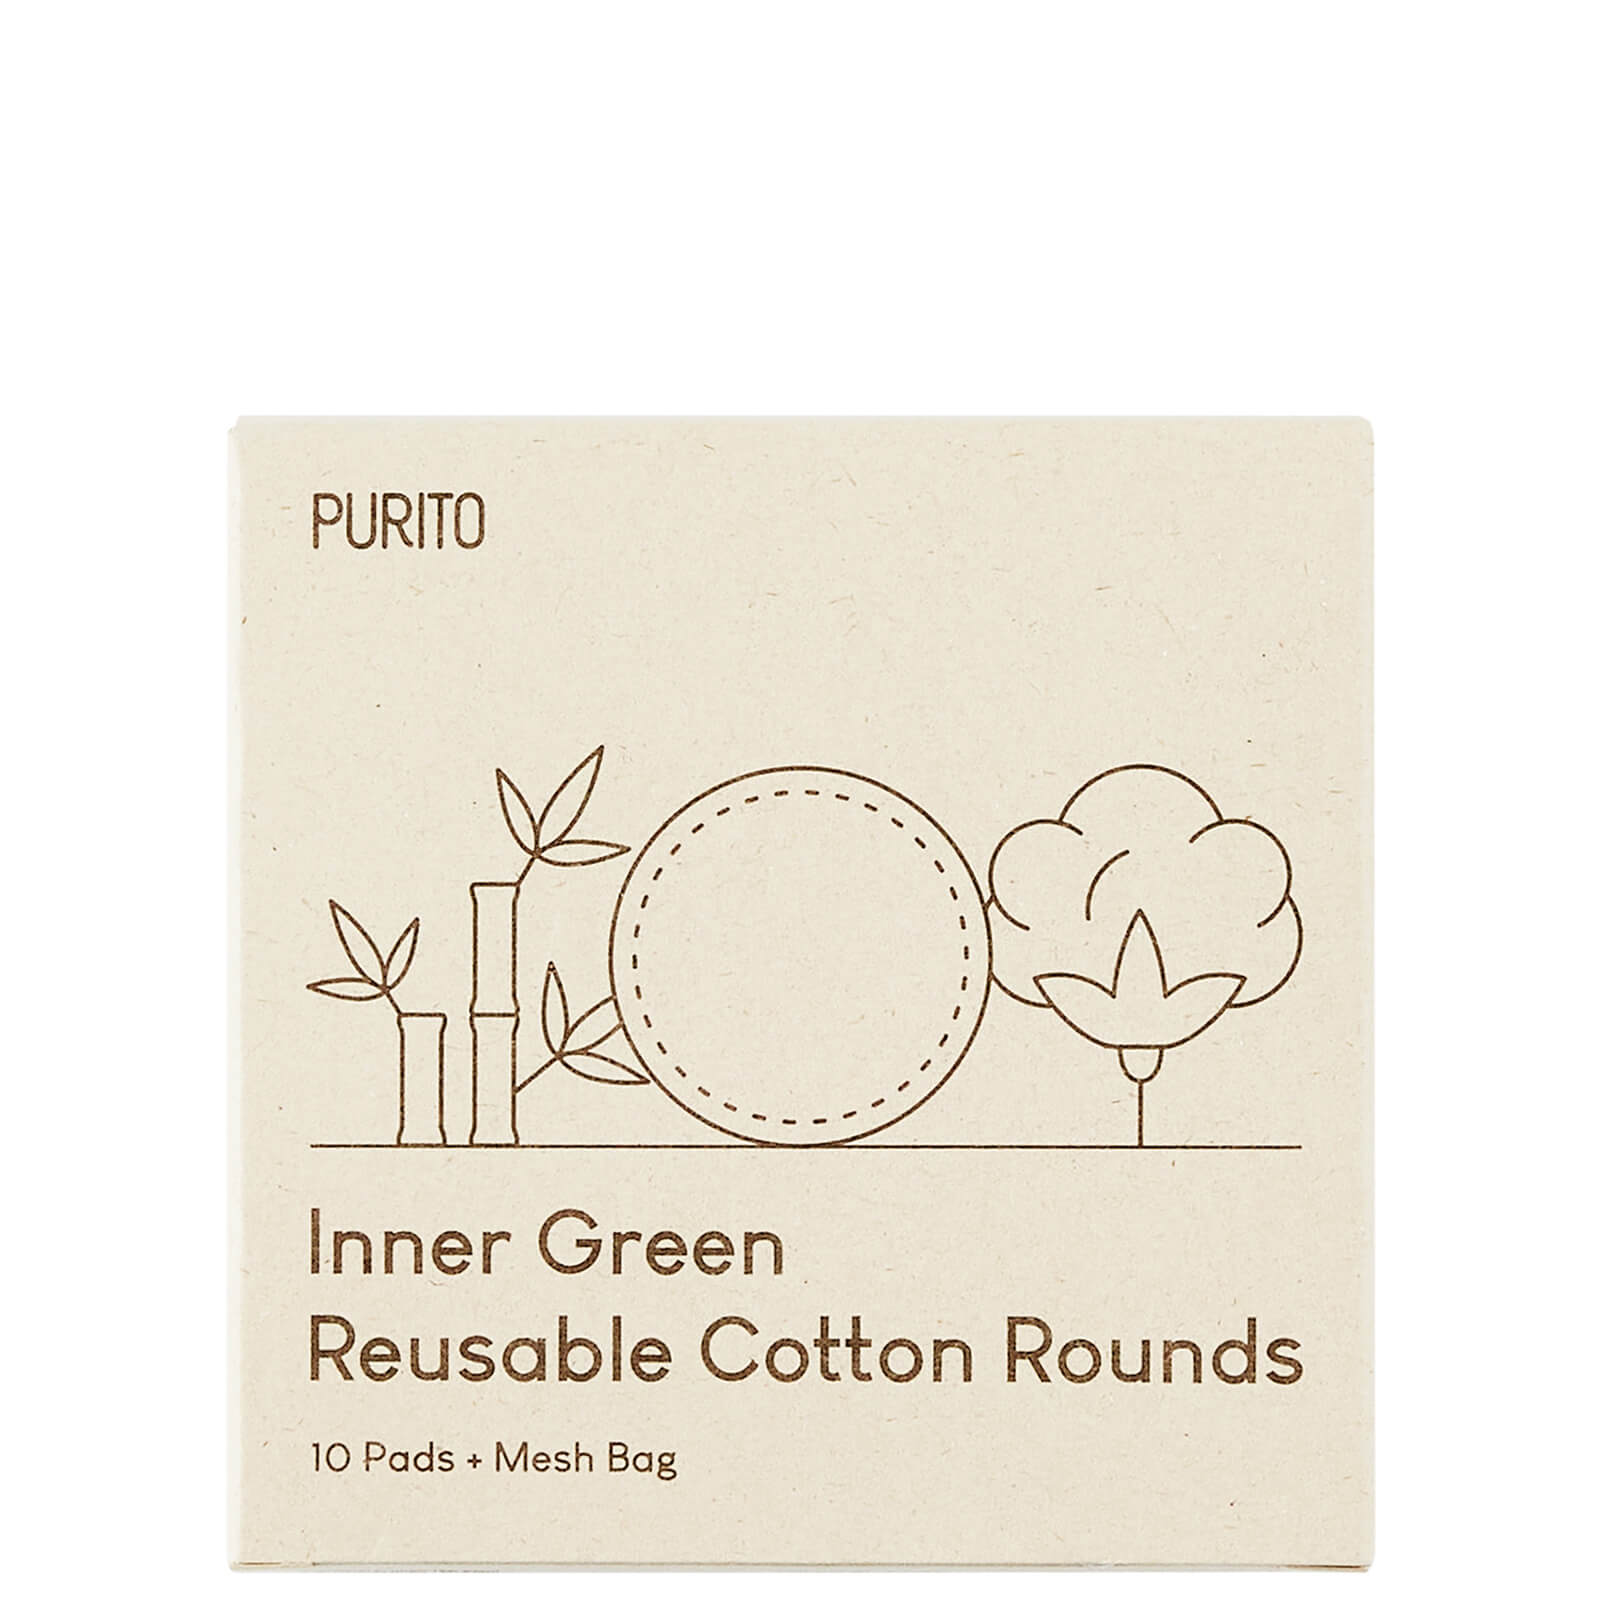 Image of PURITO Inner Green Reusable Cotton Rounds 58g